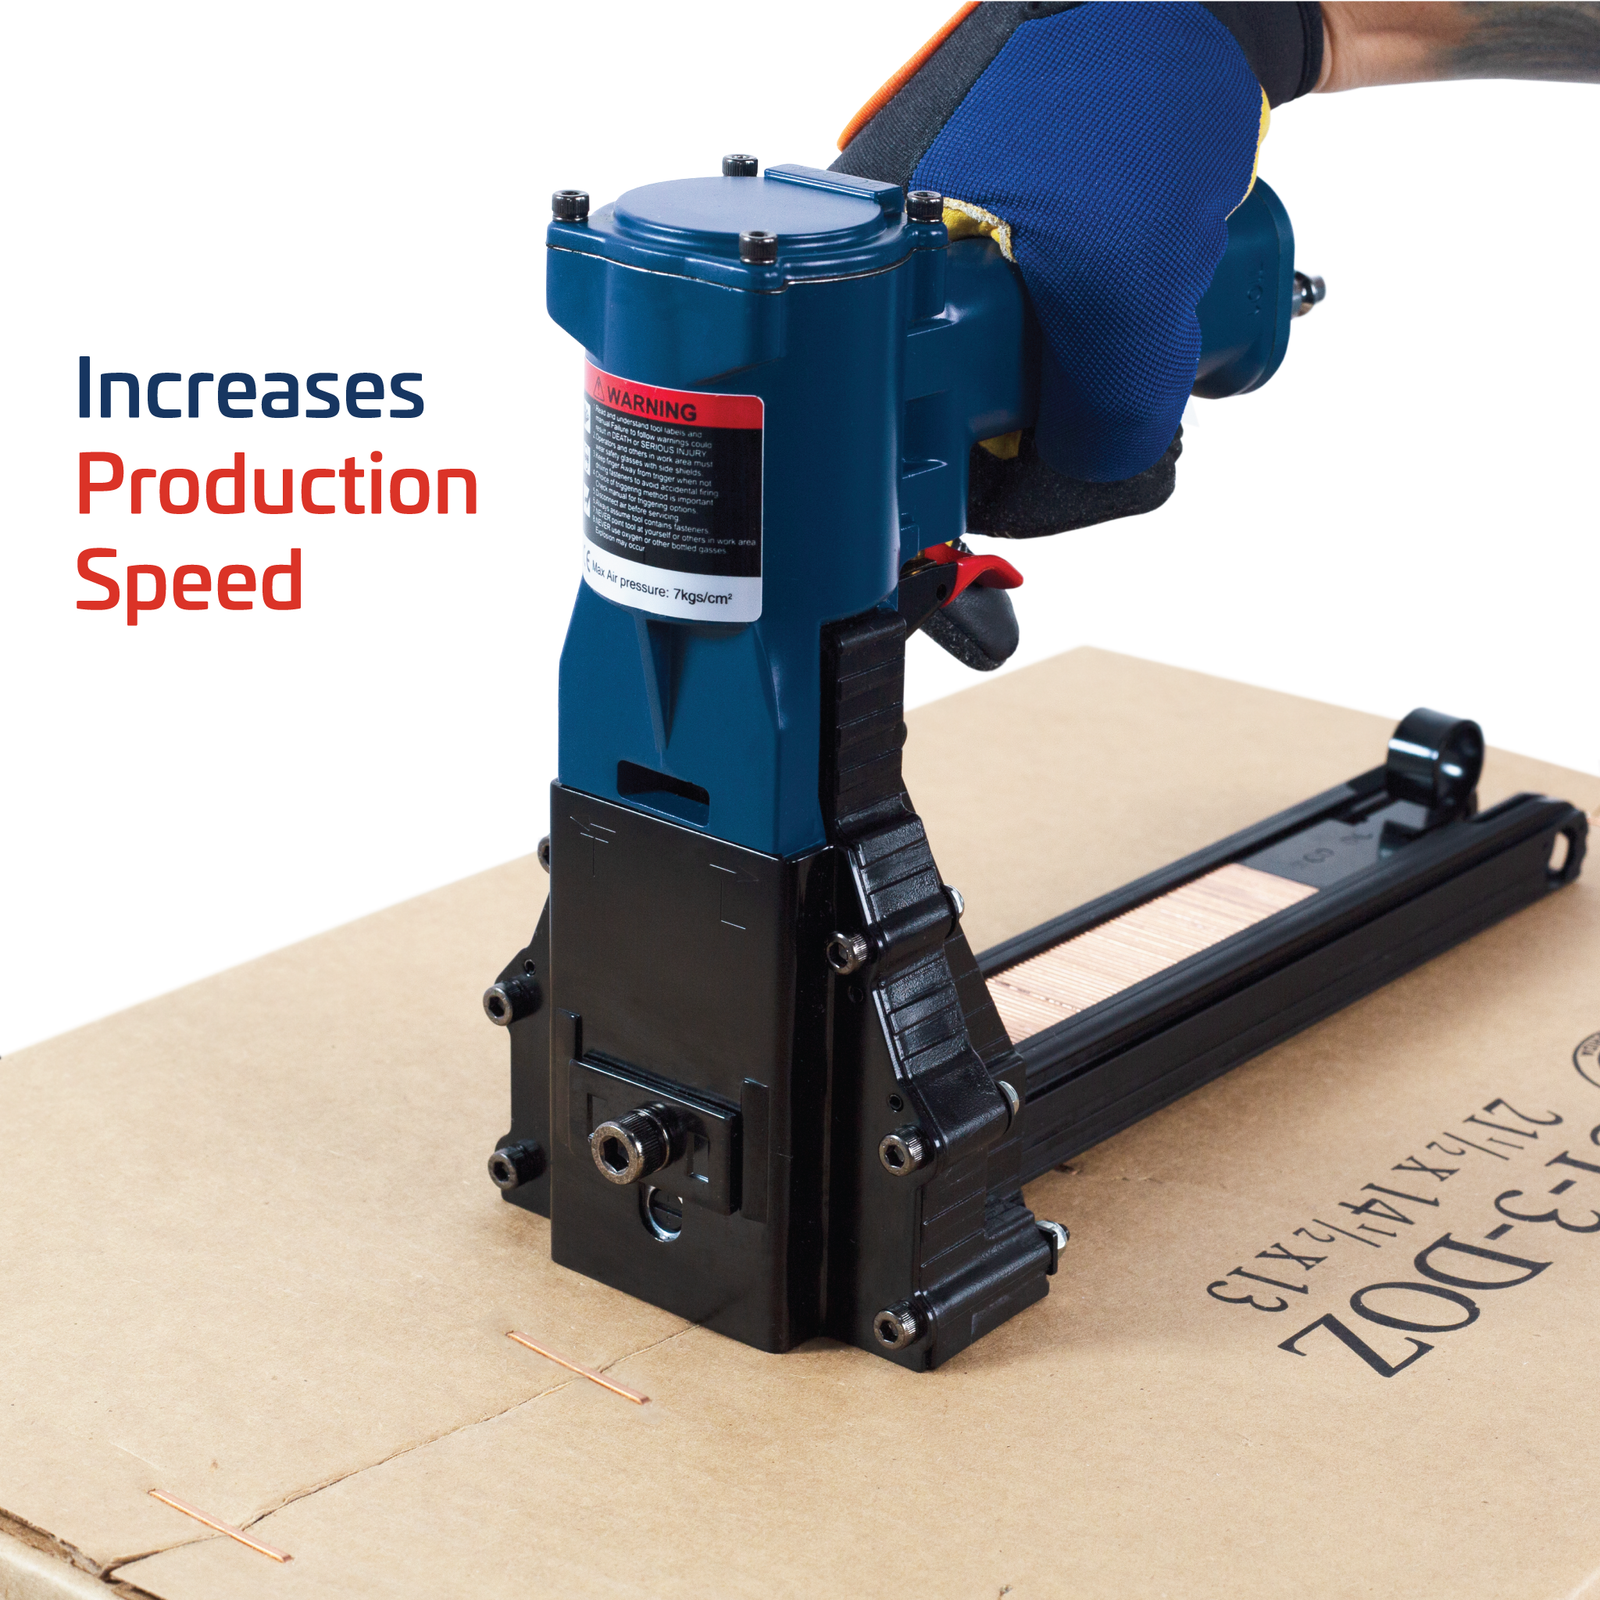 operator wearing blue gloves using blue/black staple gun on brown cardboard box. Banner states in blue and red: increases production speed